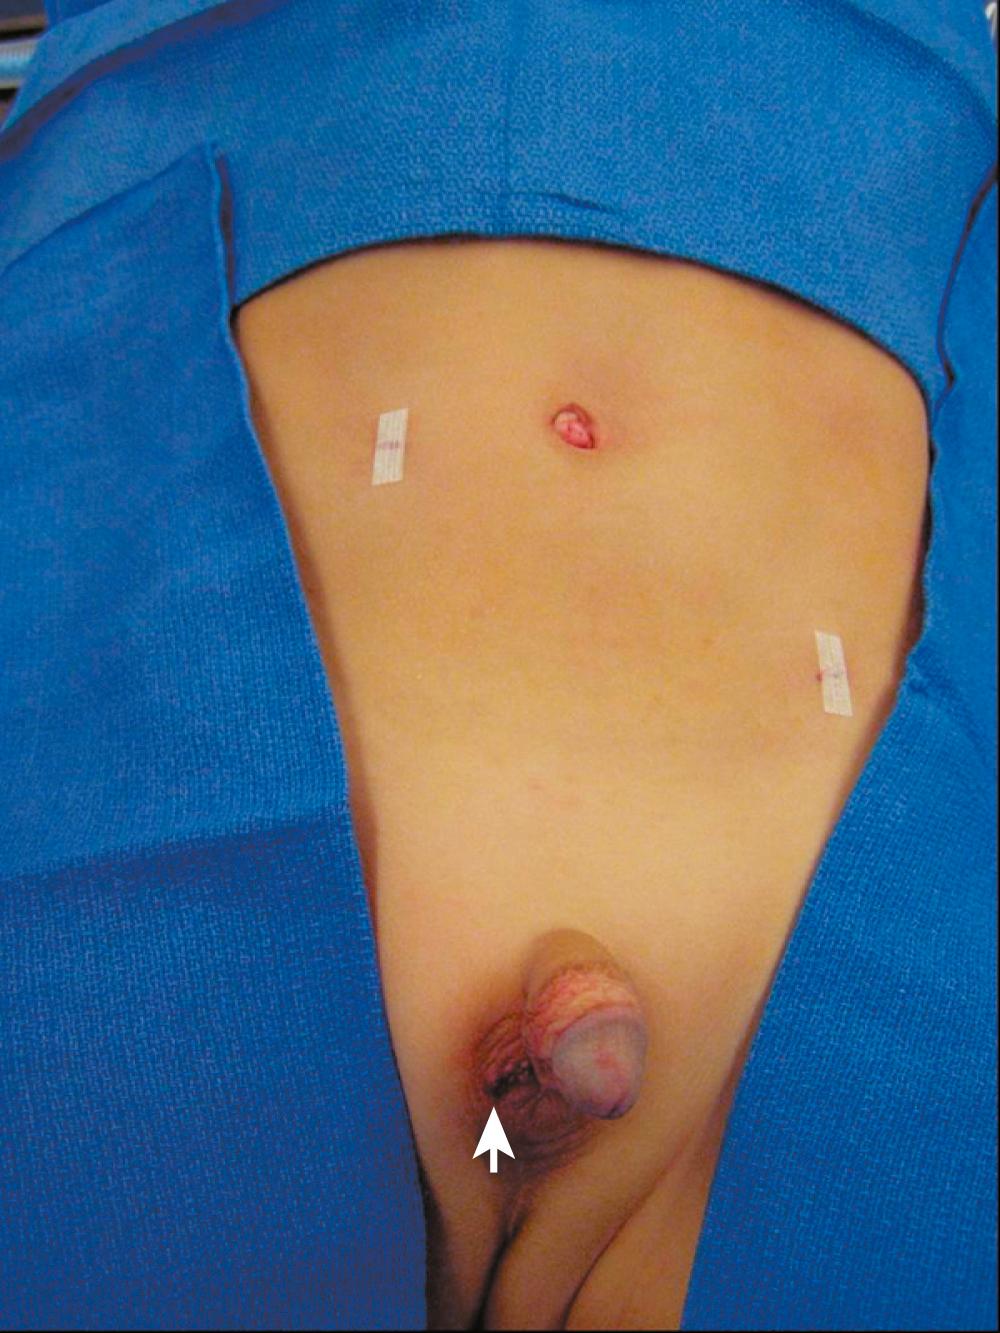 Fig. 20-10, In this patient who has undergone a laparoscopic right orchiopexy, the two stab incisions have been closed with Steri-Strips, and the umbilical fascia and skin have been closed with absorbable suture. Note the incision in the right hemiscrotum ( arrow ).